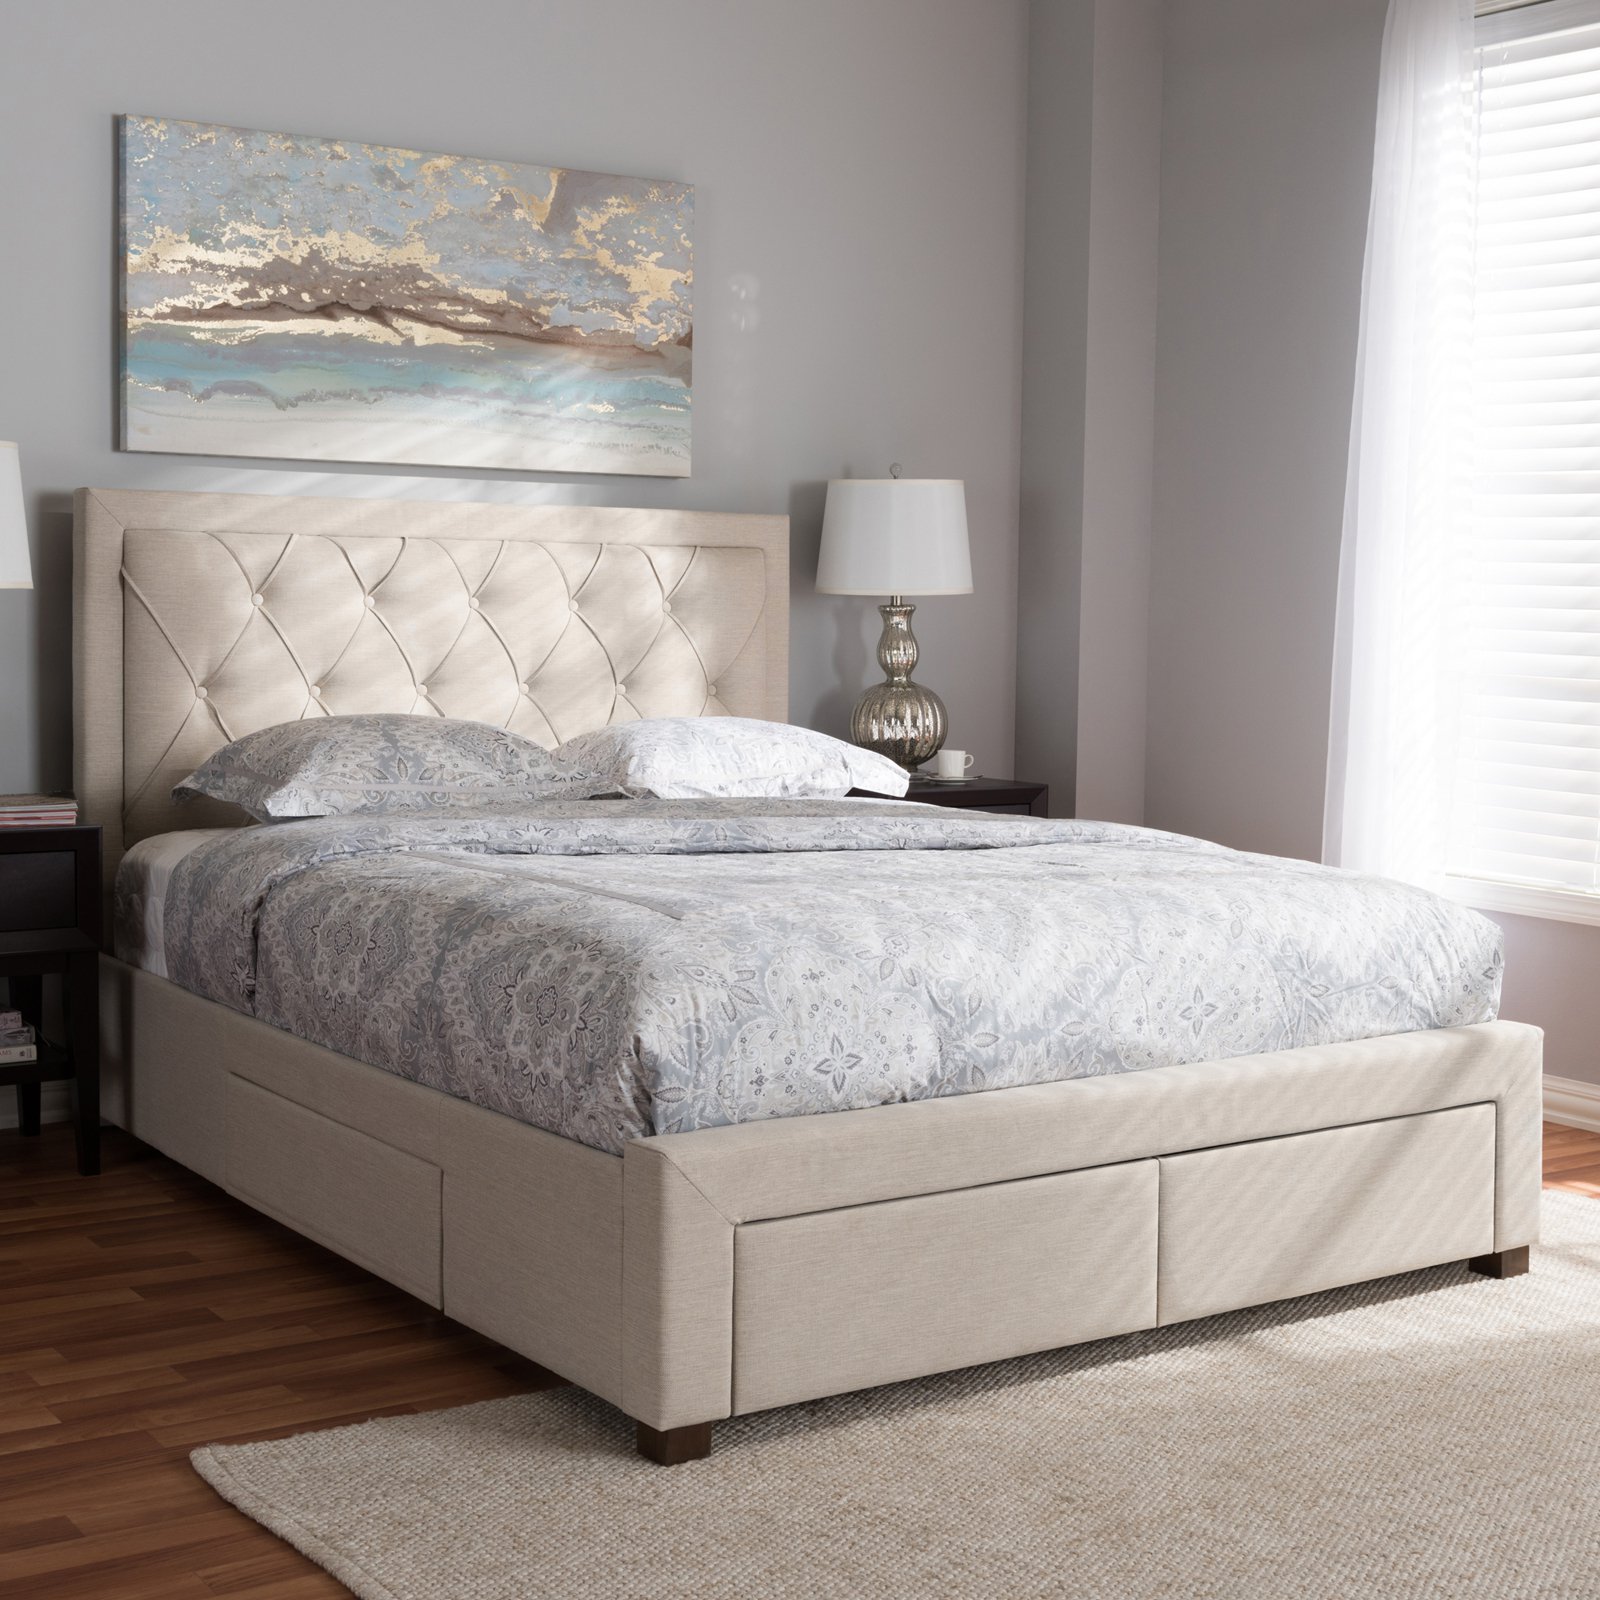 Baxton Studio Aurelie Modern and Contemporary Fabric Upholstered Storage Bed, Multiple Colors, Multiple Sizes - image 1 of 2